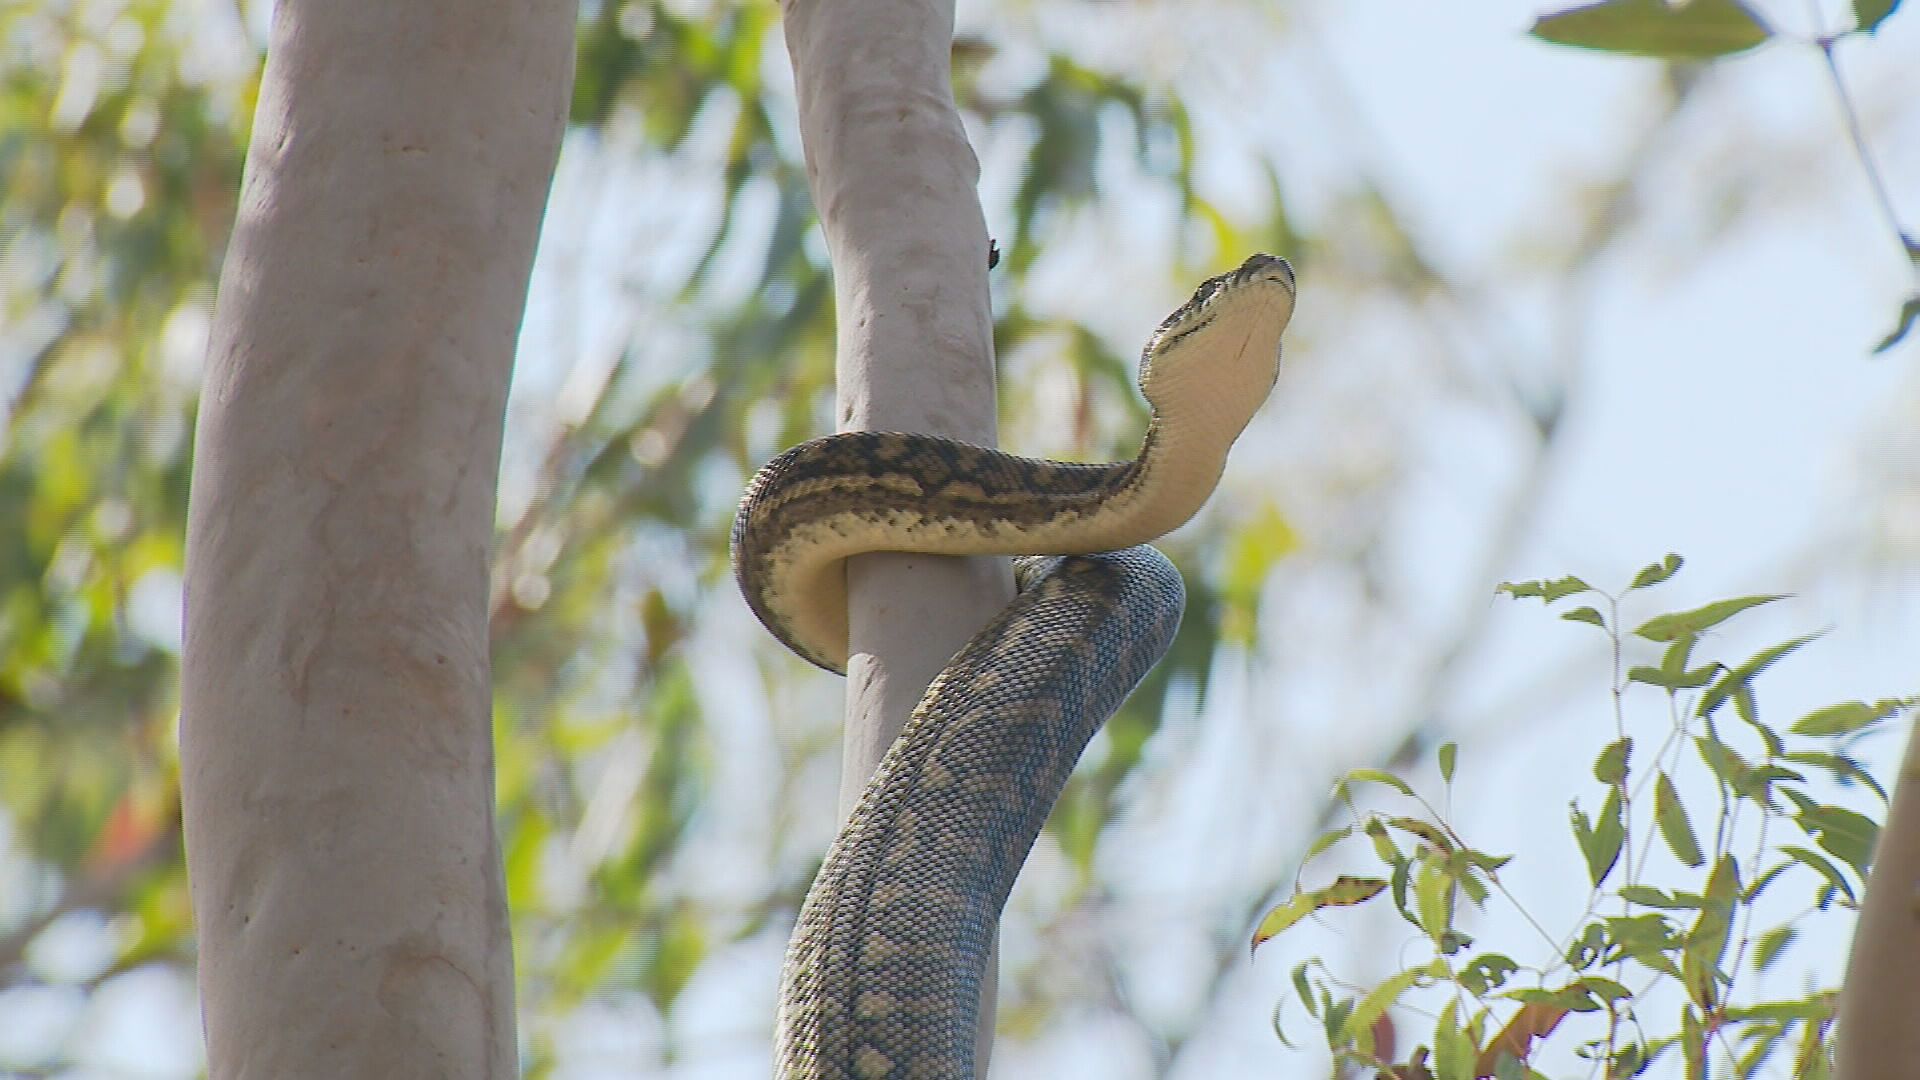 Snake bites in Australia are relatively common with about 3000 occurring annually but fatal bites are rare.